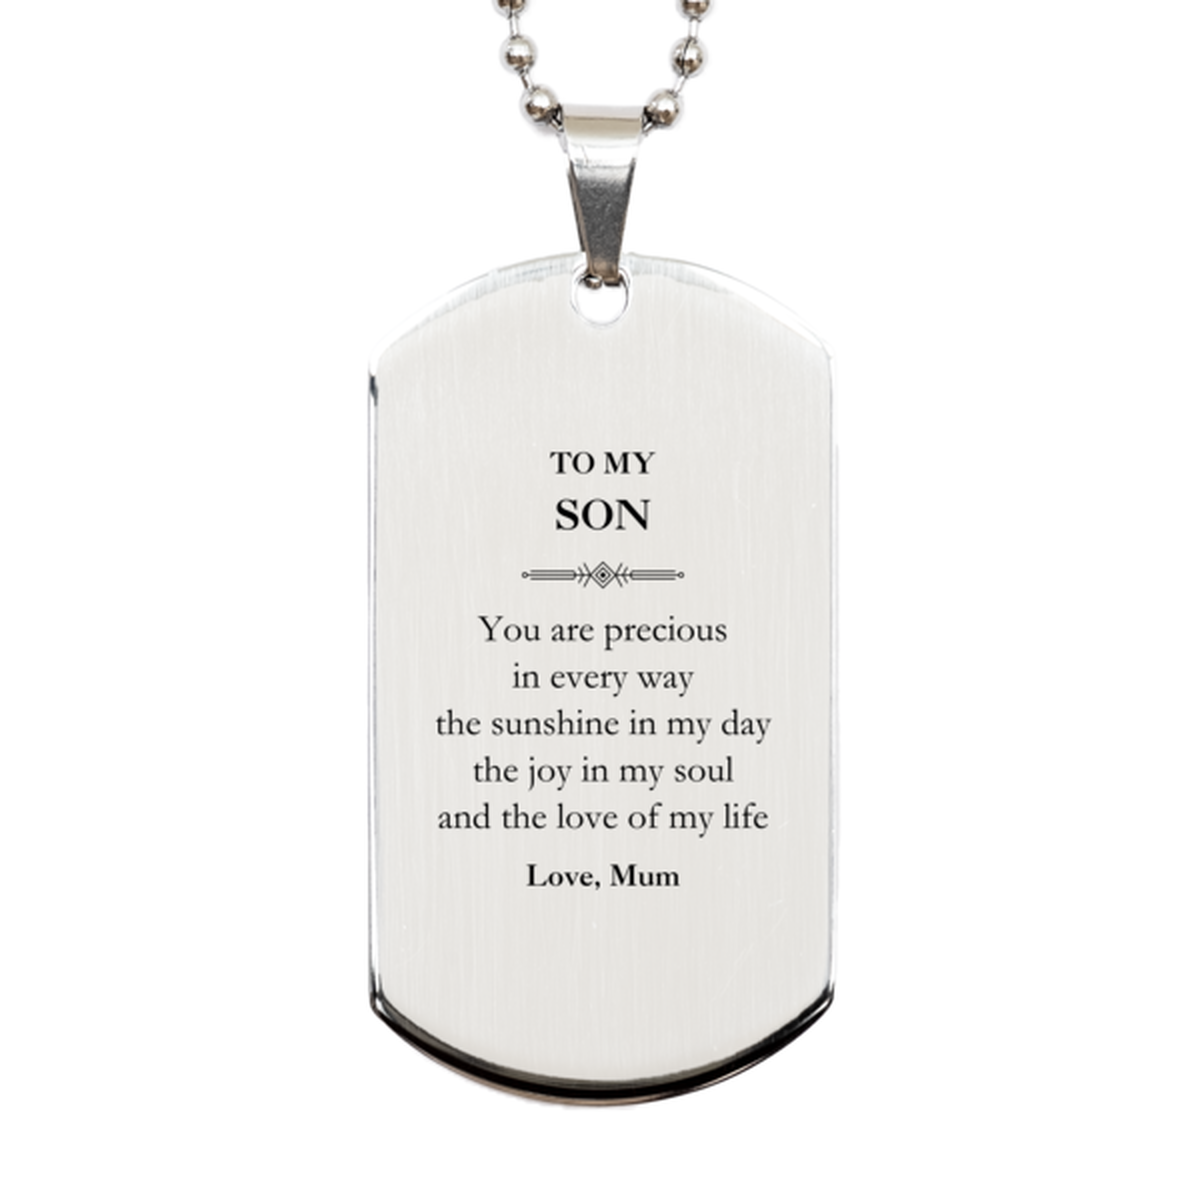 Graduation Gifts for Son Silver Dog Tag Present from Mum, Christmas Son Birthday Gifts Son You are precious in every way the sunshine in my day. Love, Mum